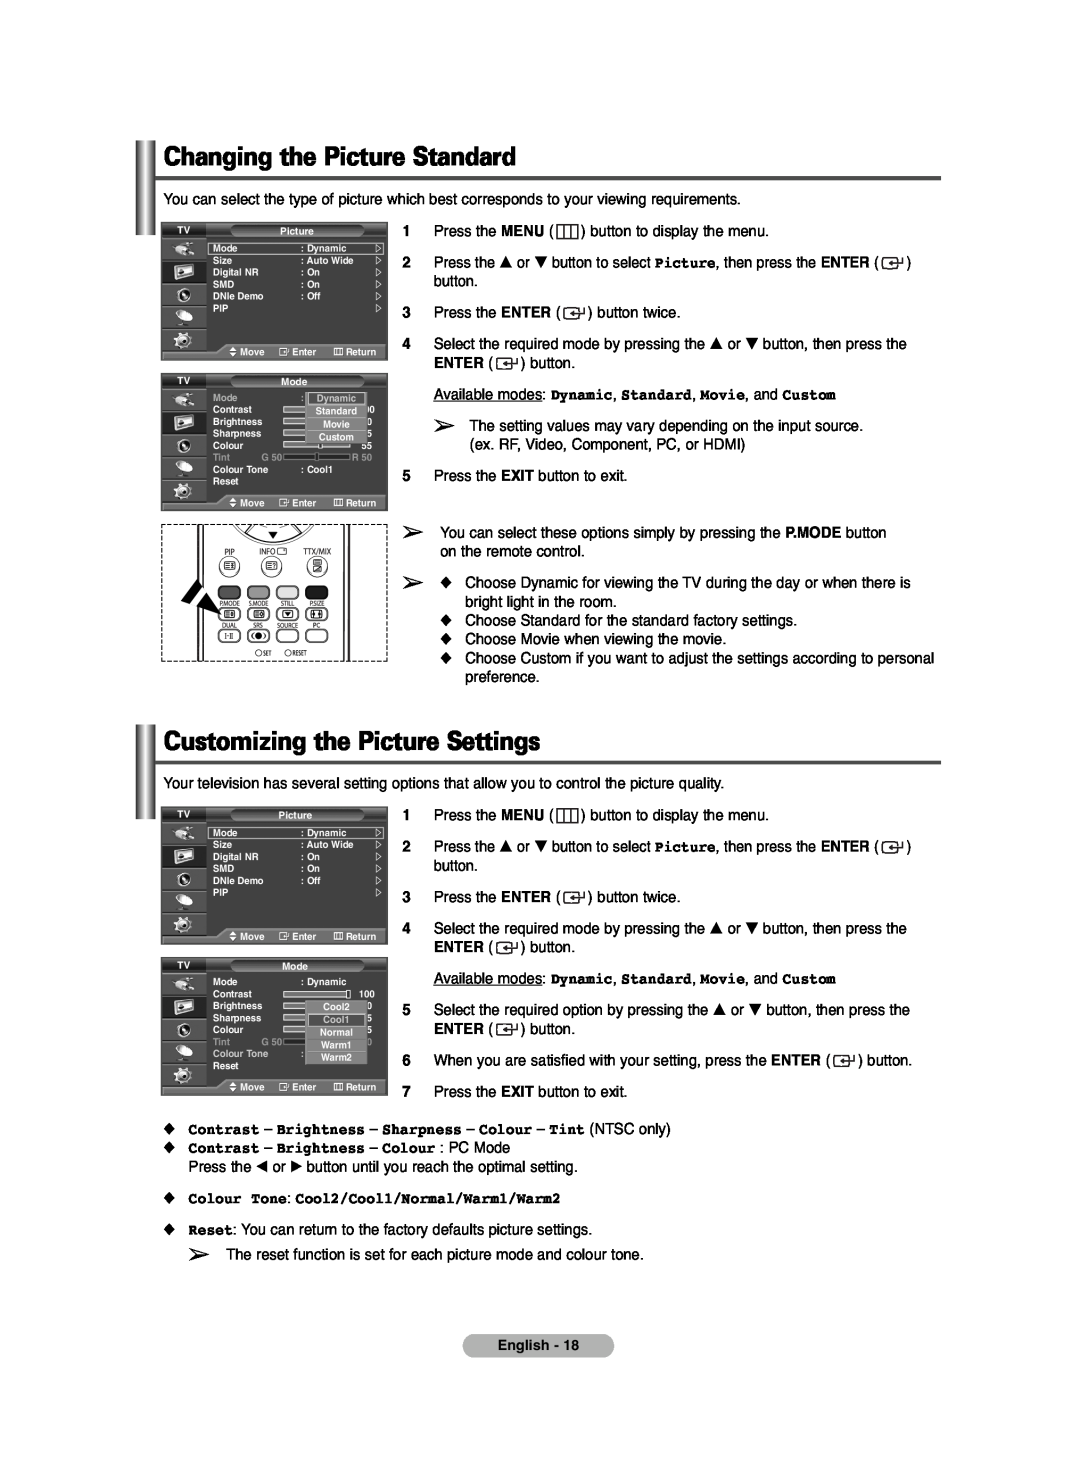 Samsung PDP-TELEVISION manual Changing the Picture Standard, Customizing the Picture Settings 